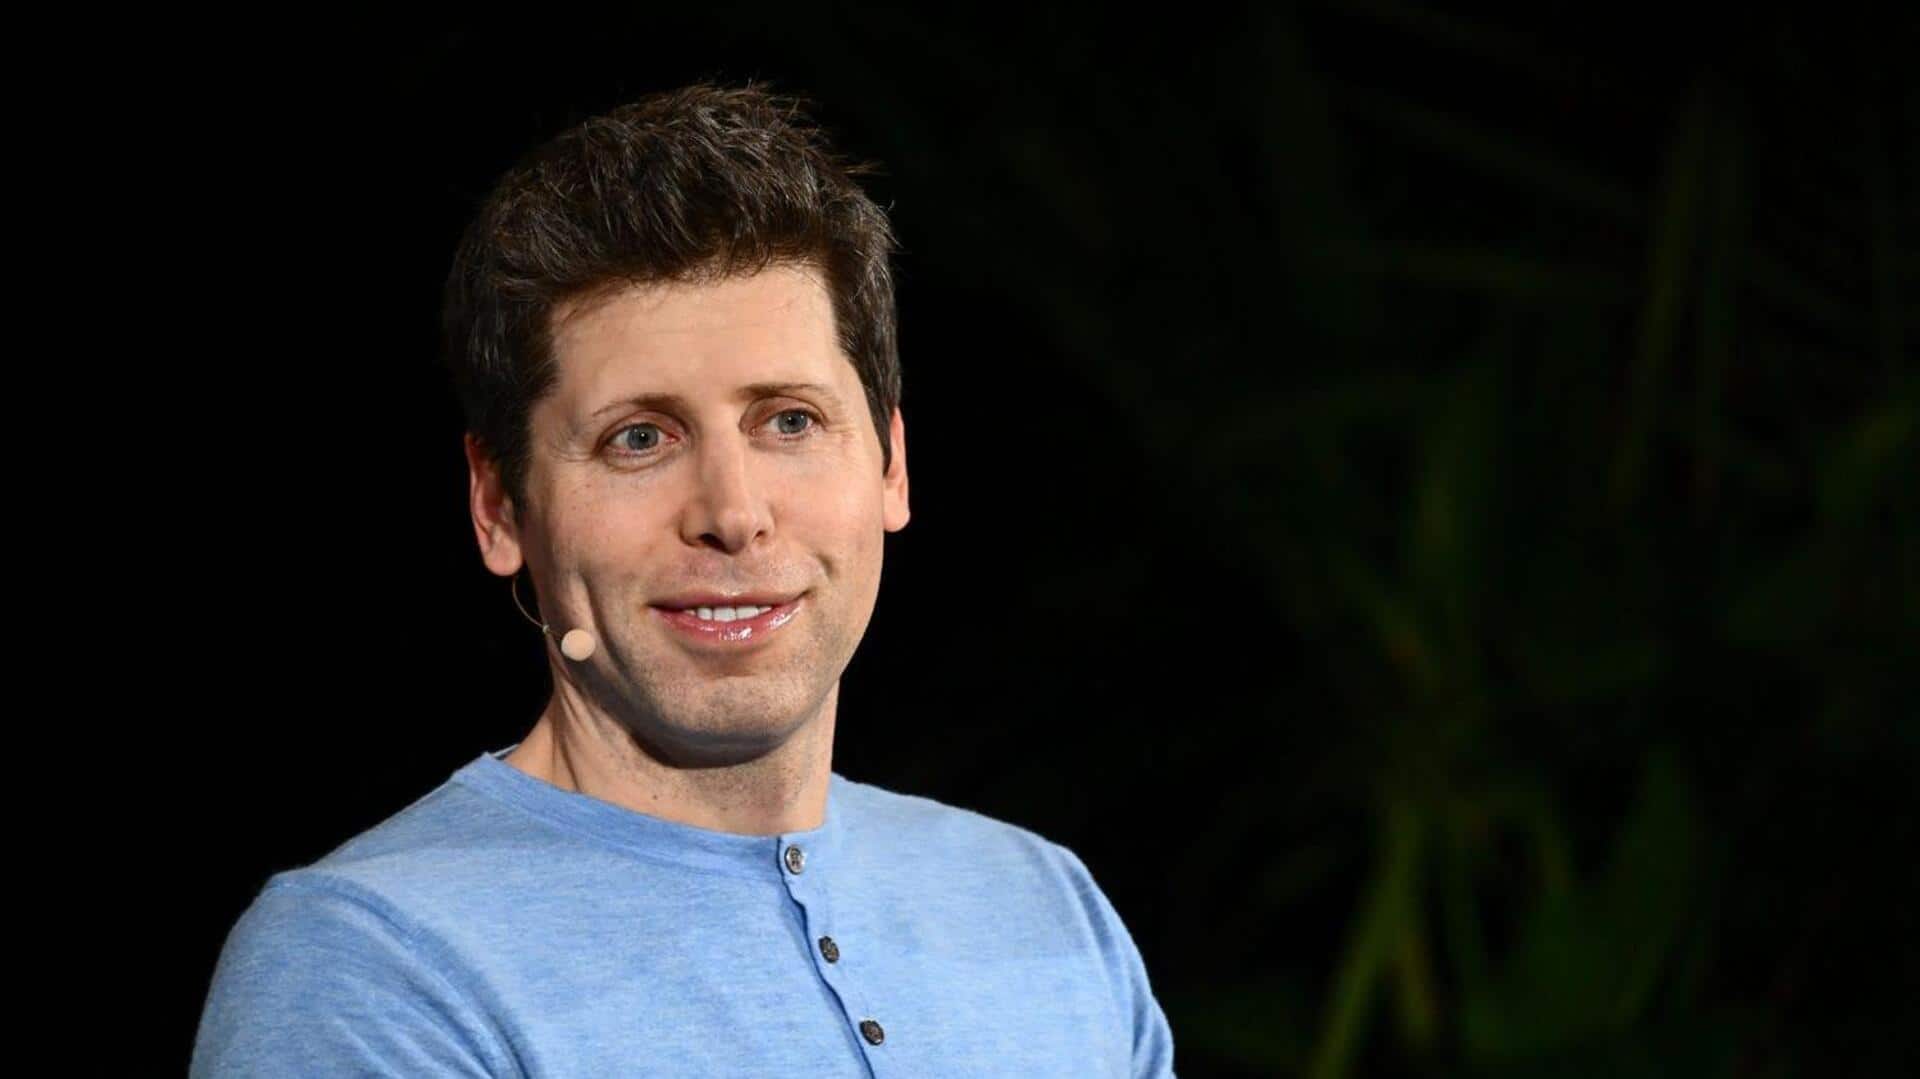 Human-level AI is on the way: Sam Altman at Davos